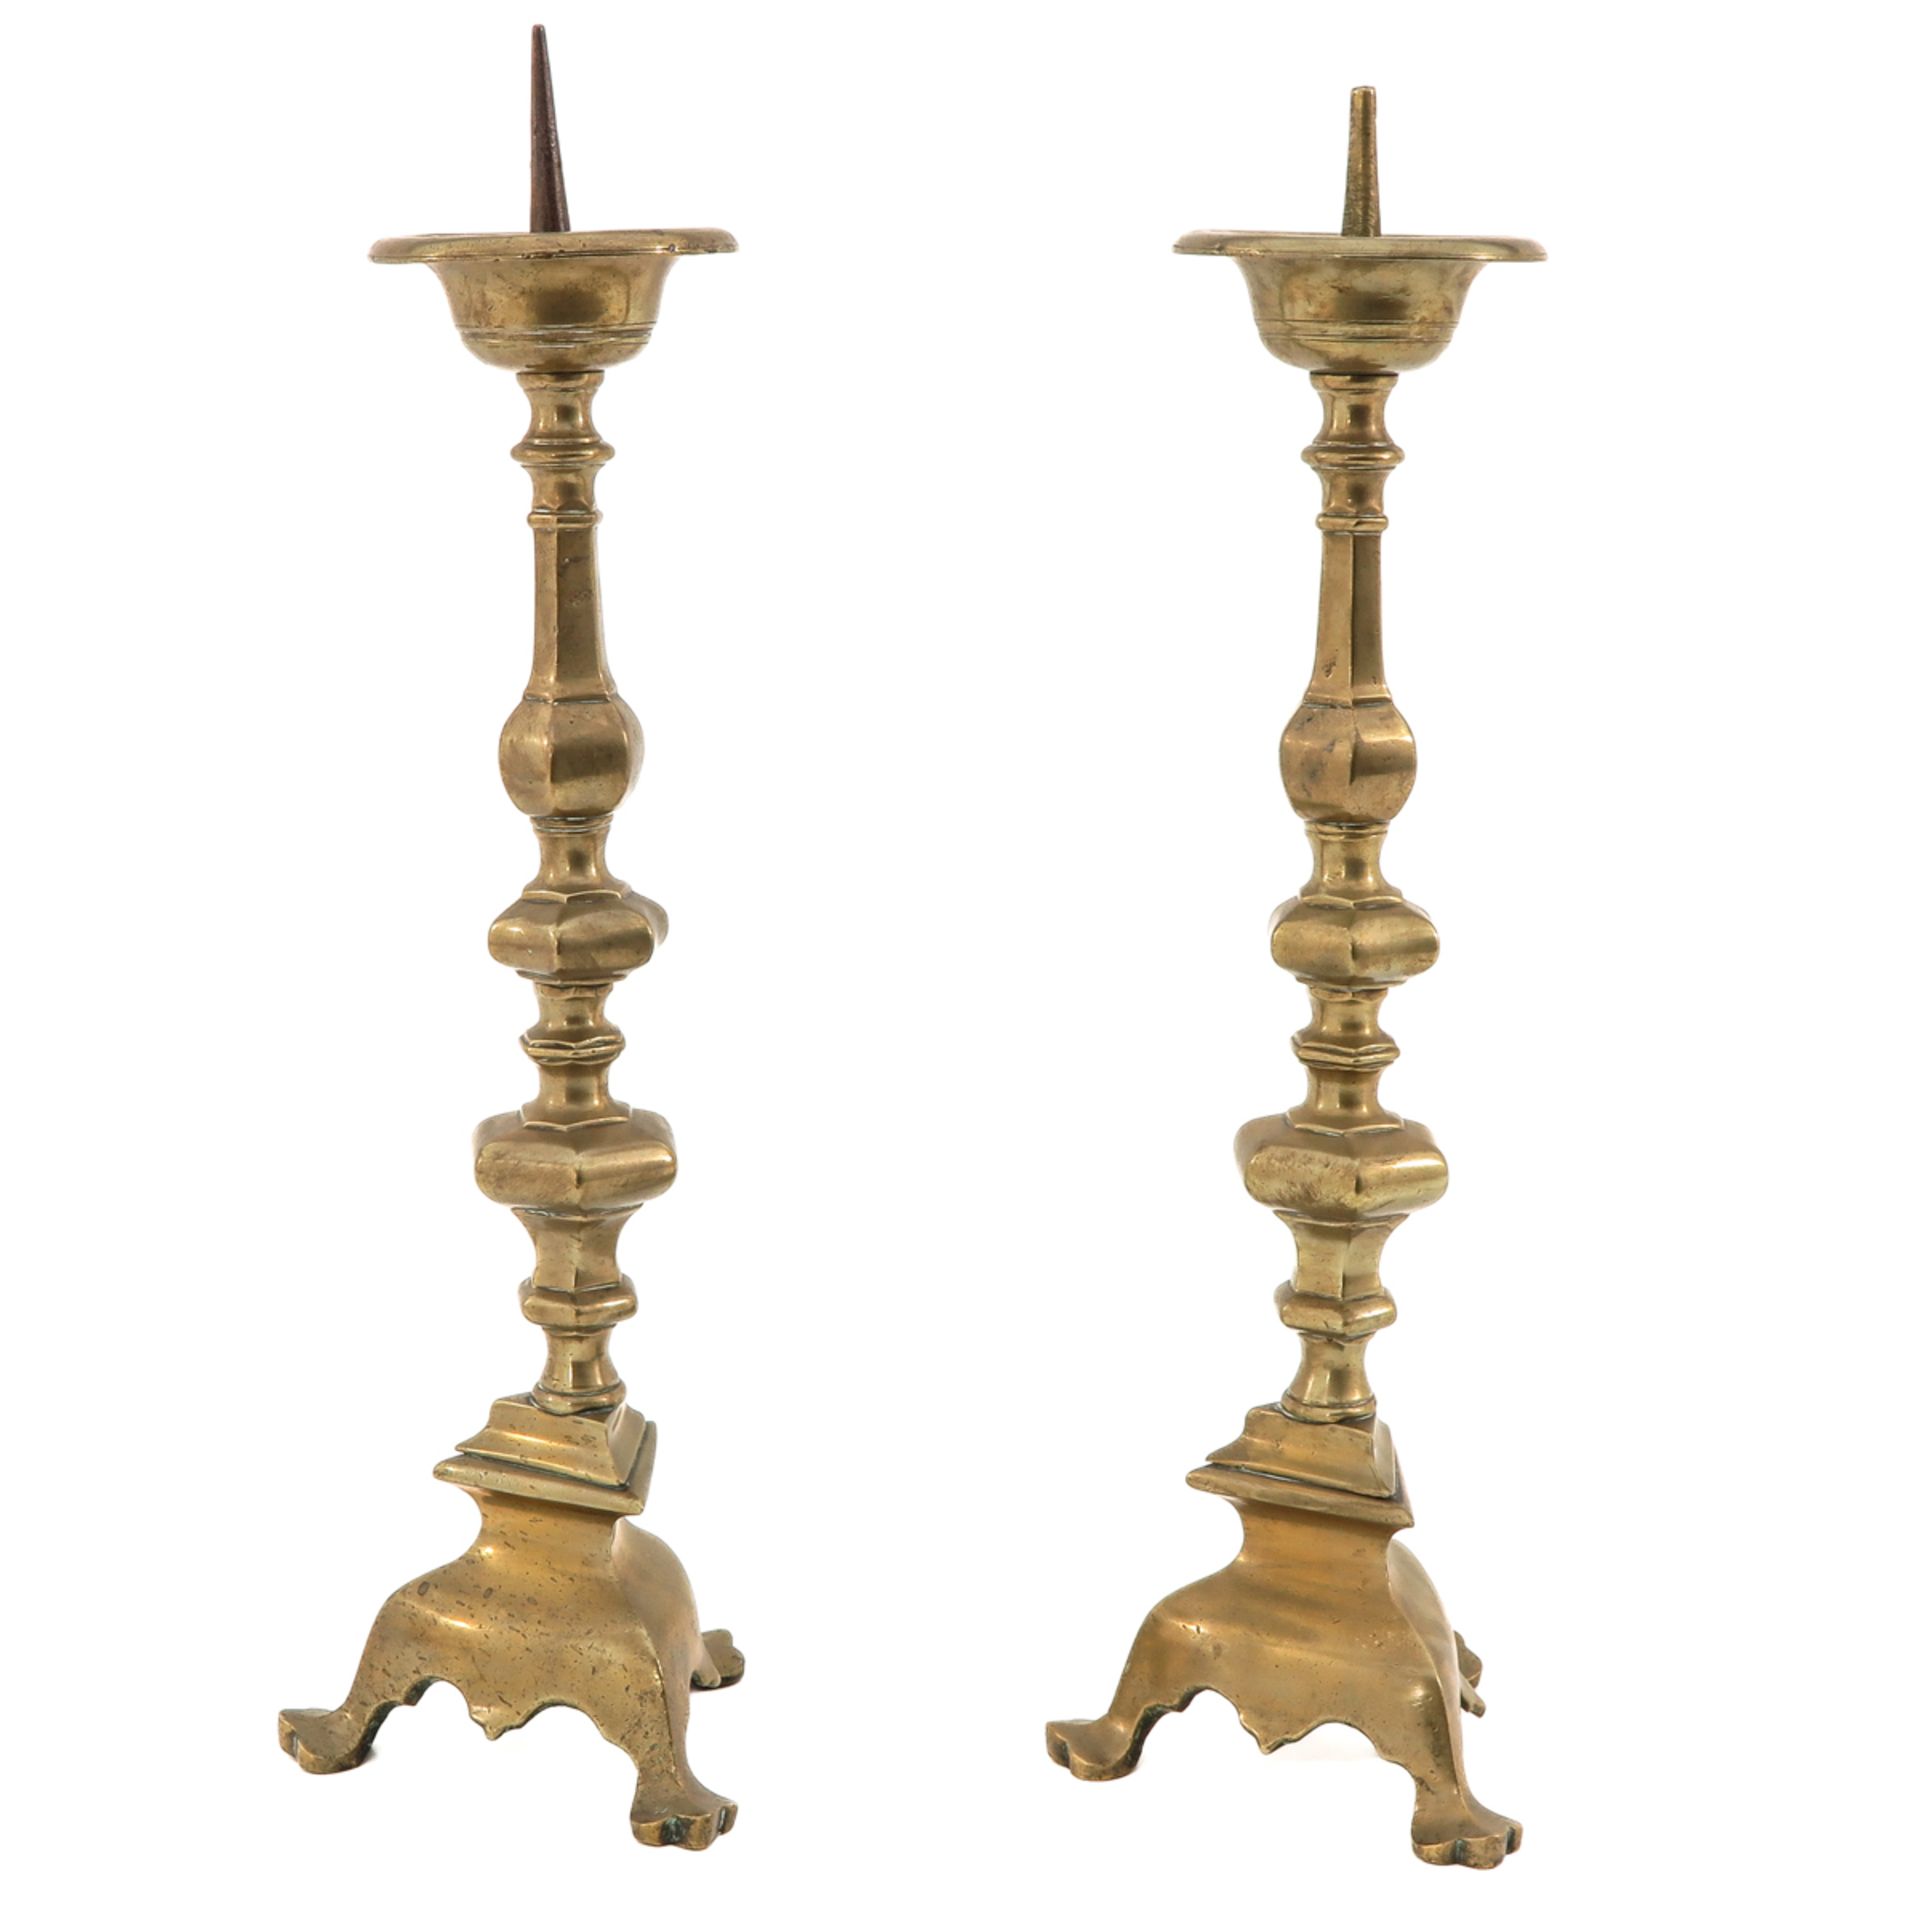 A Pair of Altar Candlesticks - Image 4 of 10